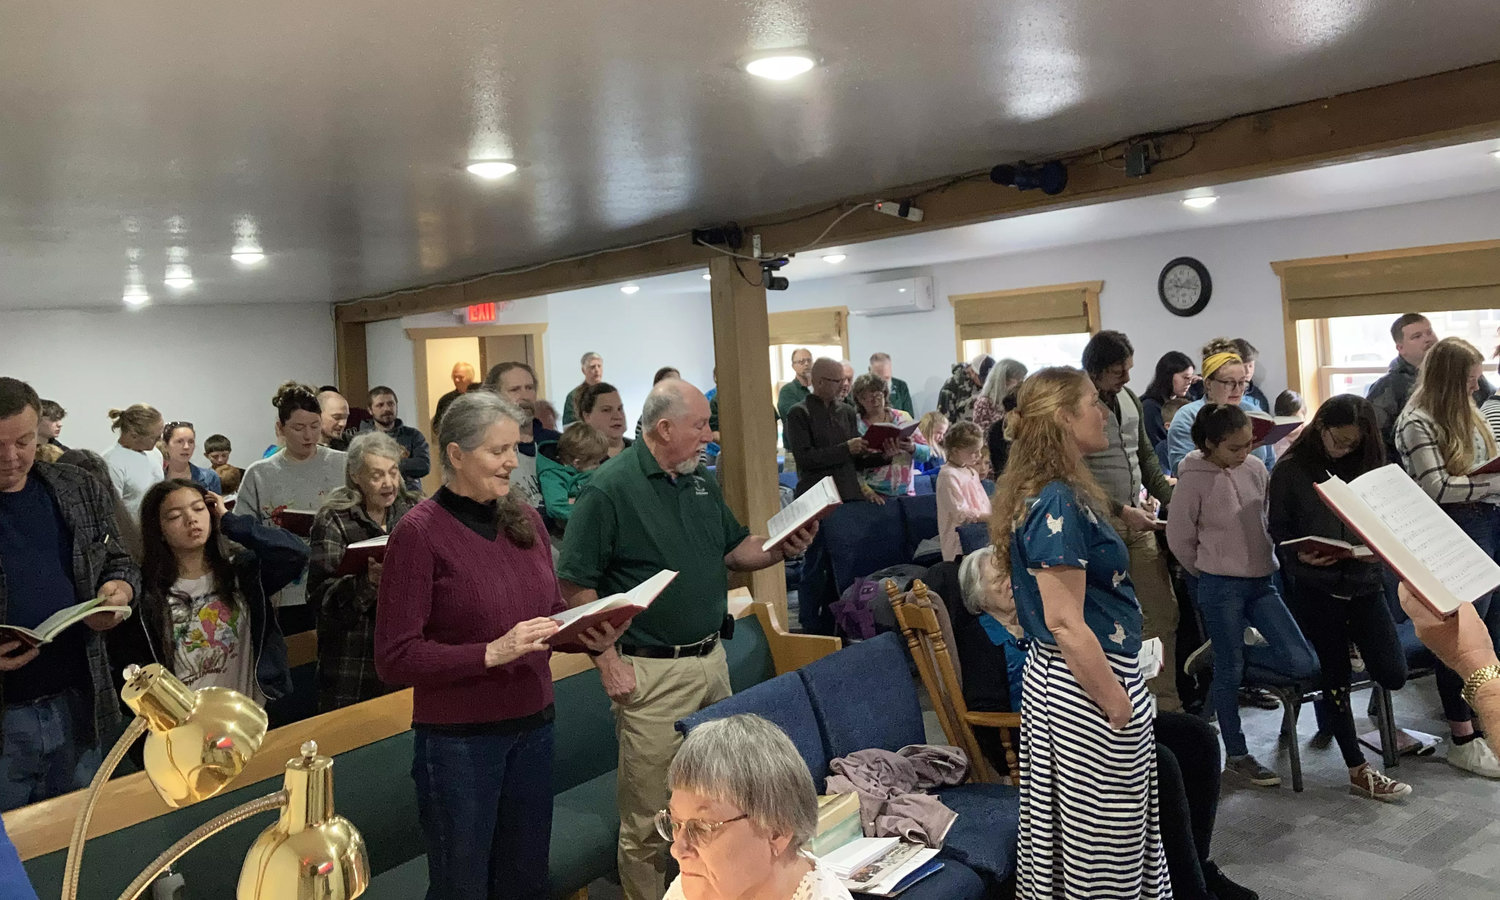 Liberty Church has outgrown the worship area configured in the basement of its unfinished building. (Photo courtesy Jamie Baldwin)